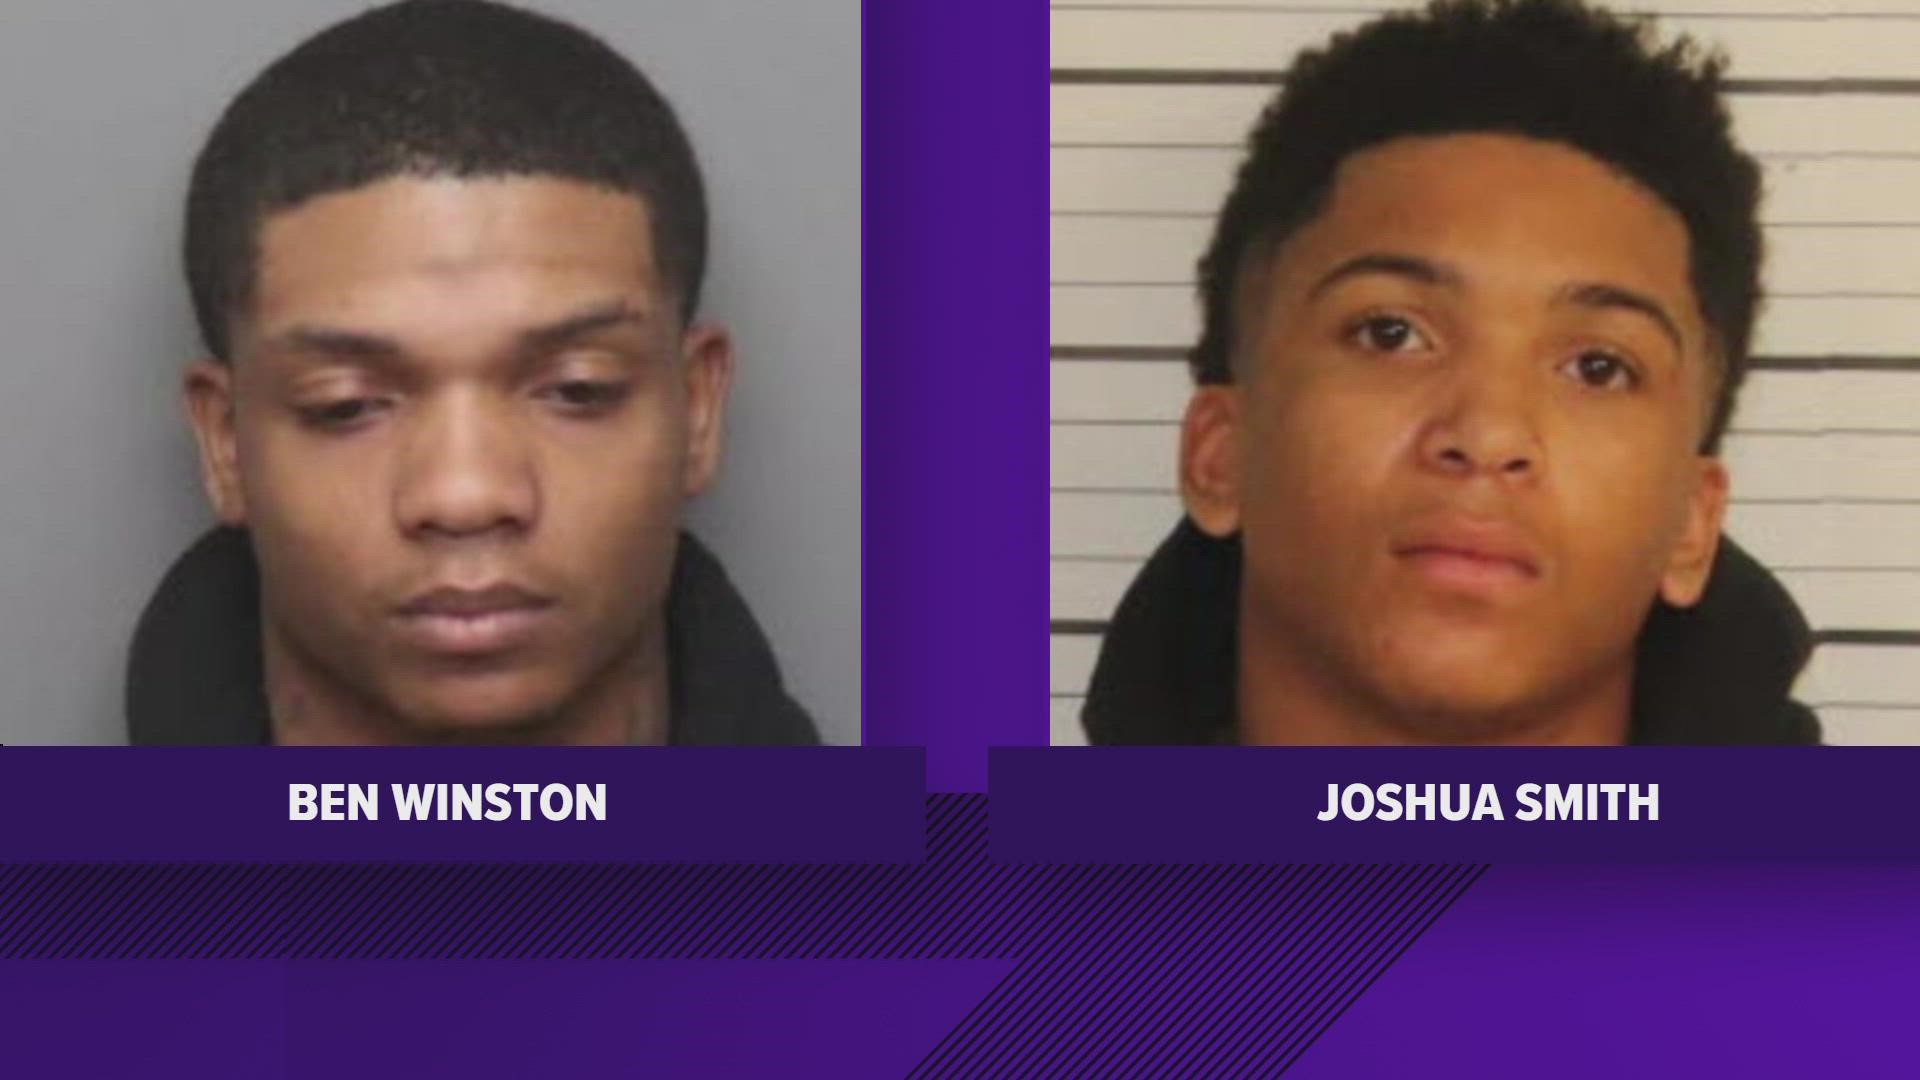 Warrants have been issued for both Joshua Smith and Ben Winston.